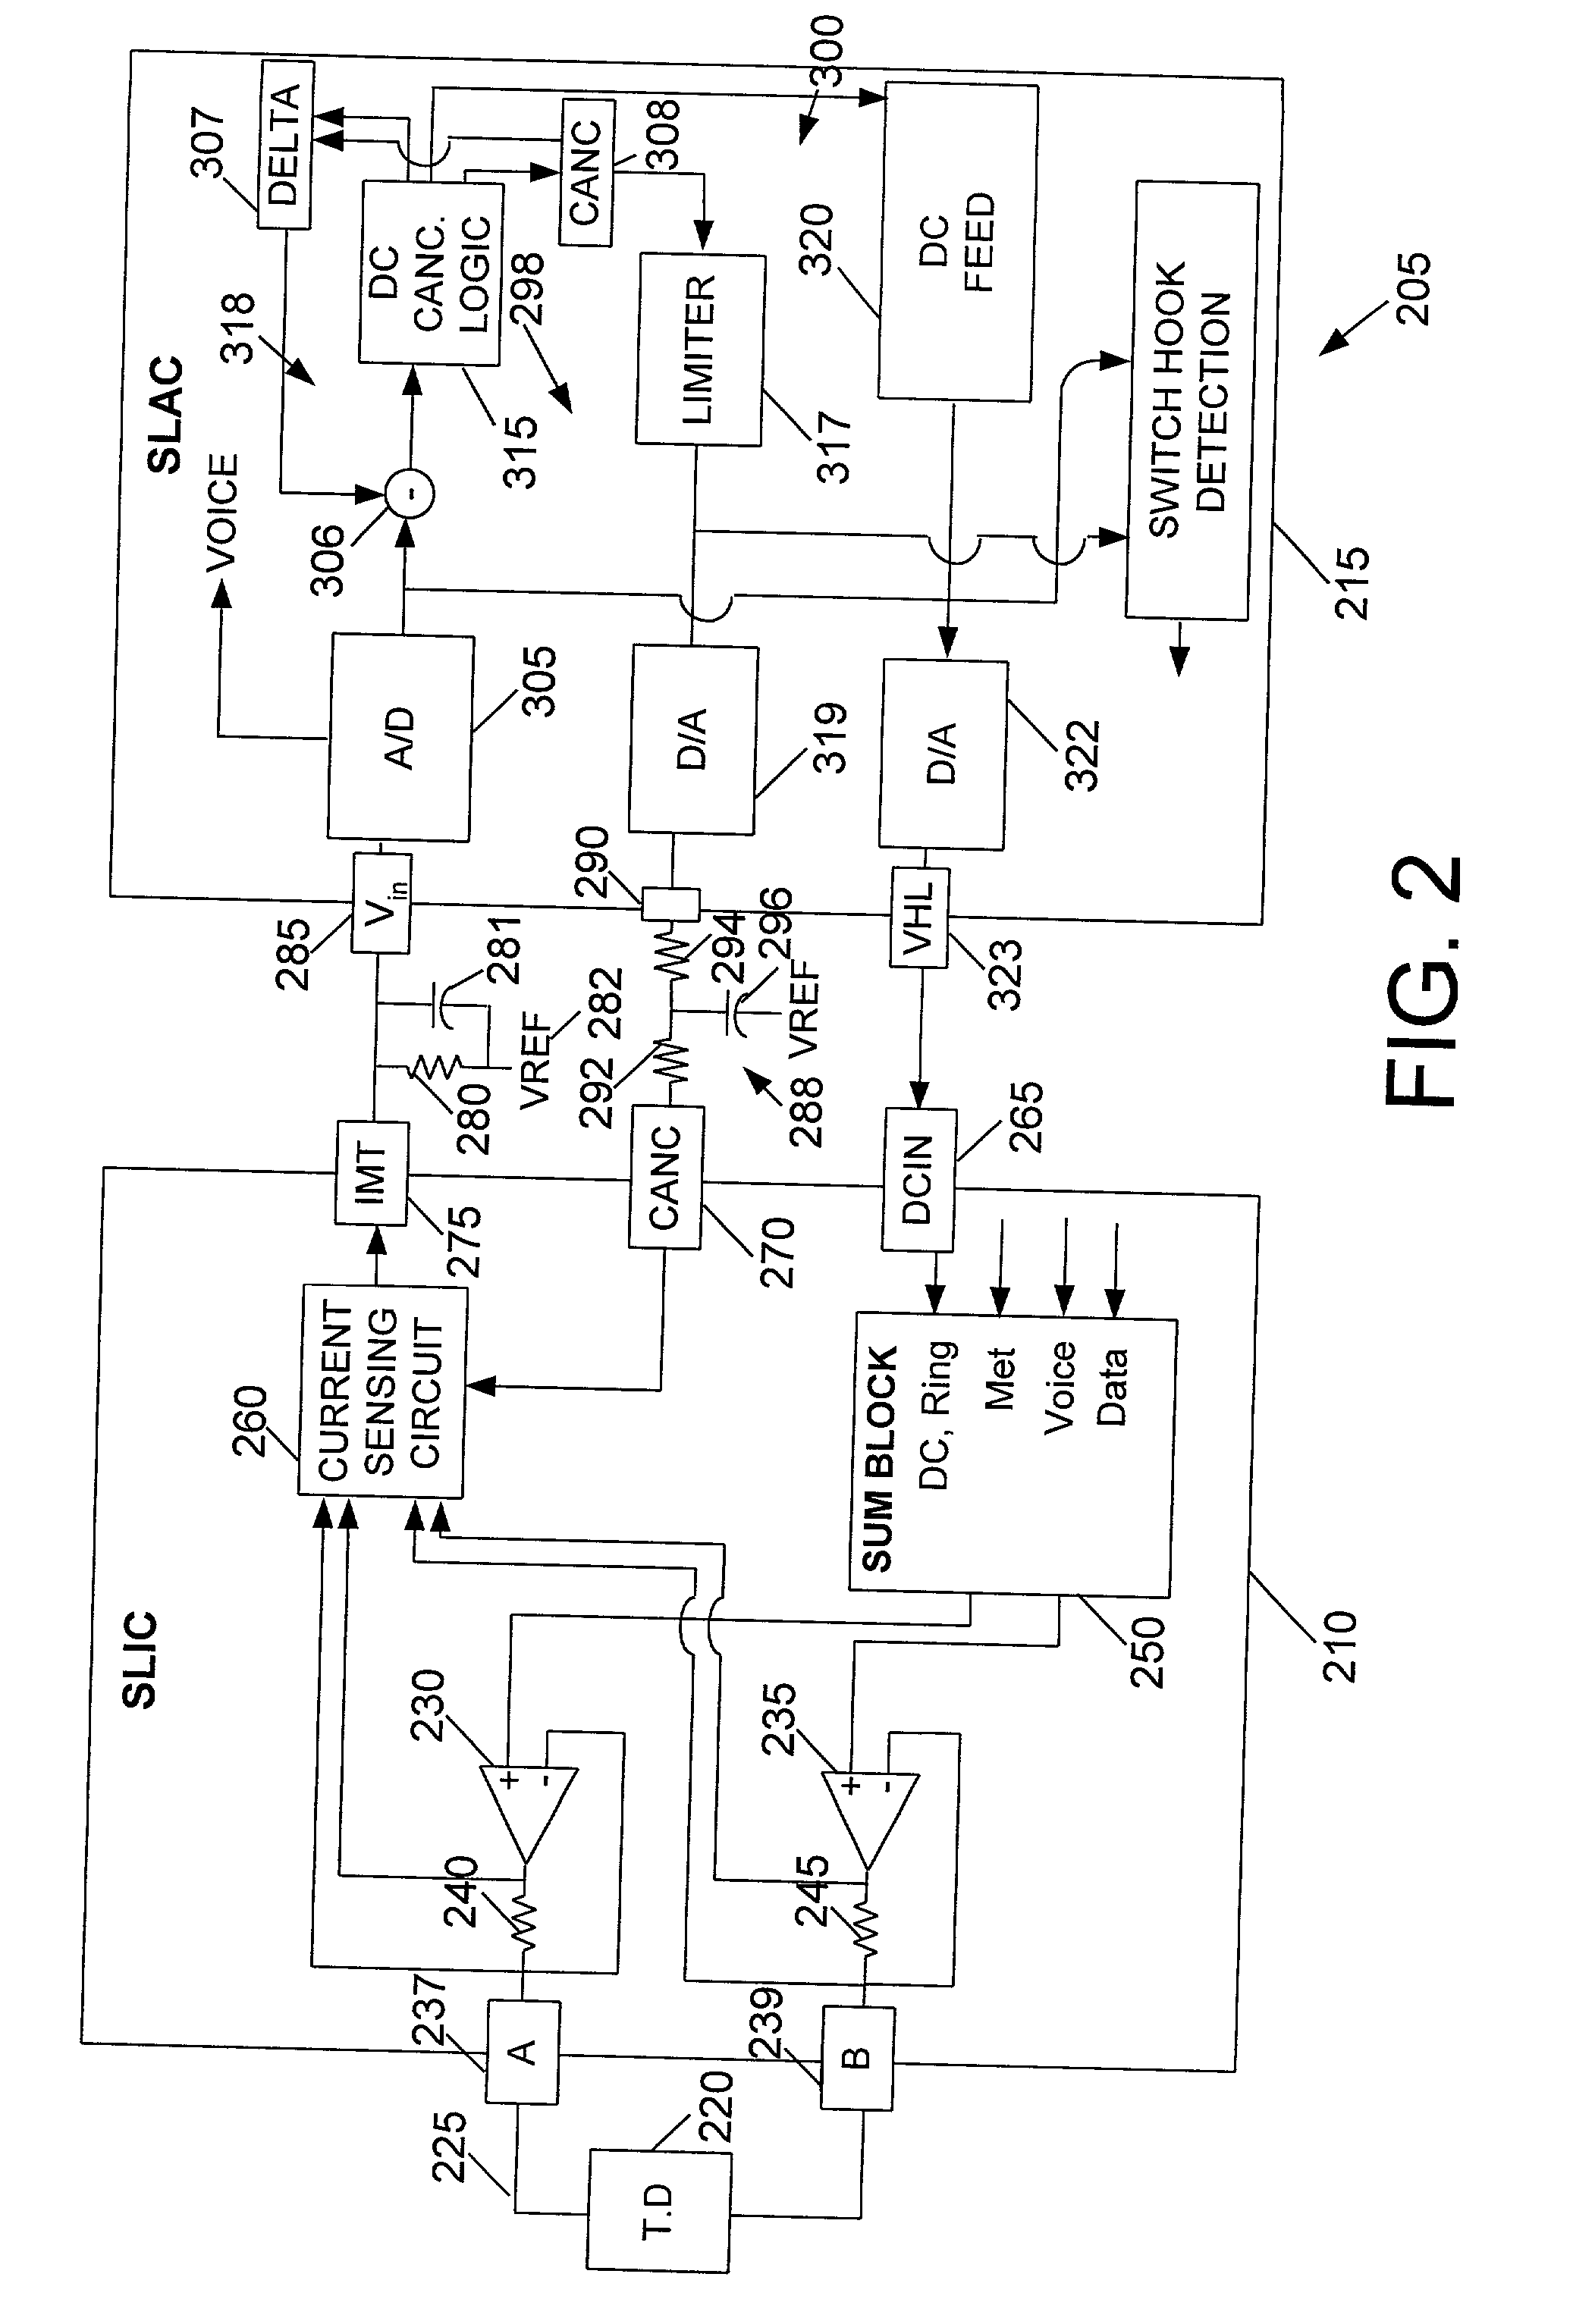 Method and apparatus for adaptive DC level control